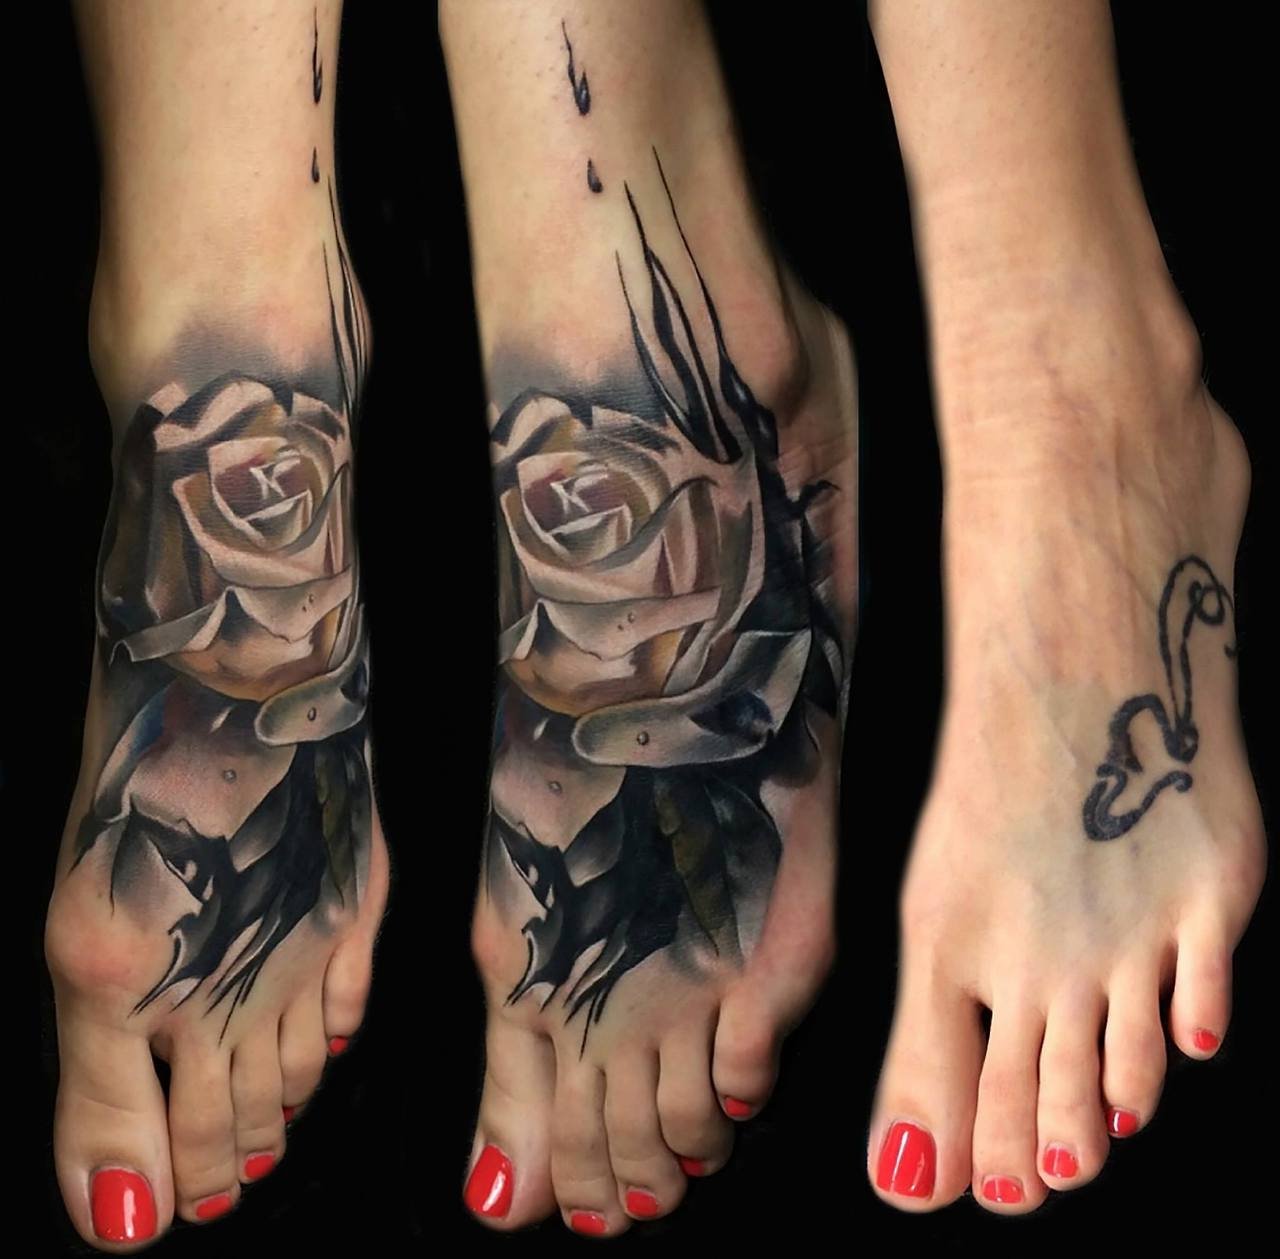 10 Lovely Ideas For Cover Up Tattoos foot rose cover up tattoo design best tattoo ideas gallery 5 2024